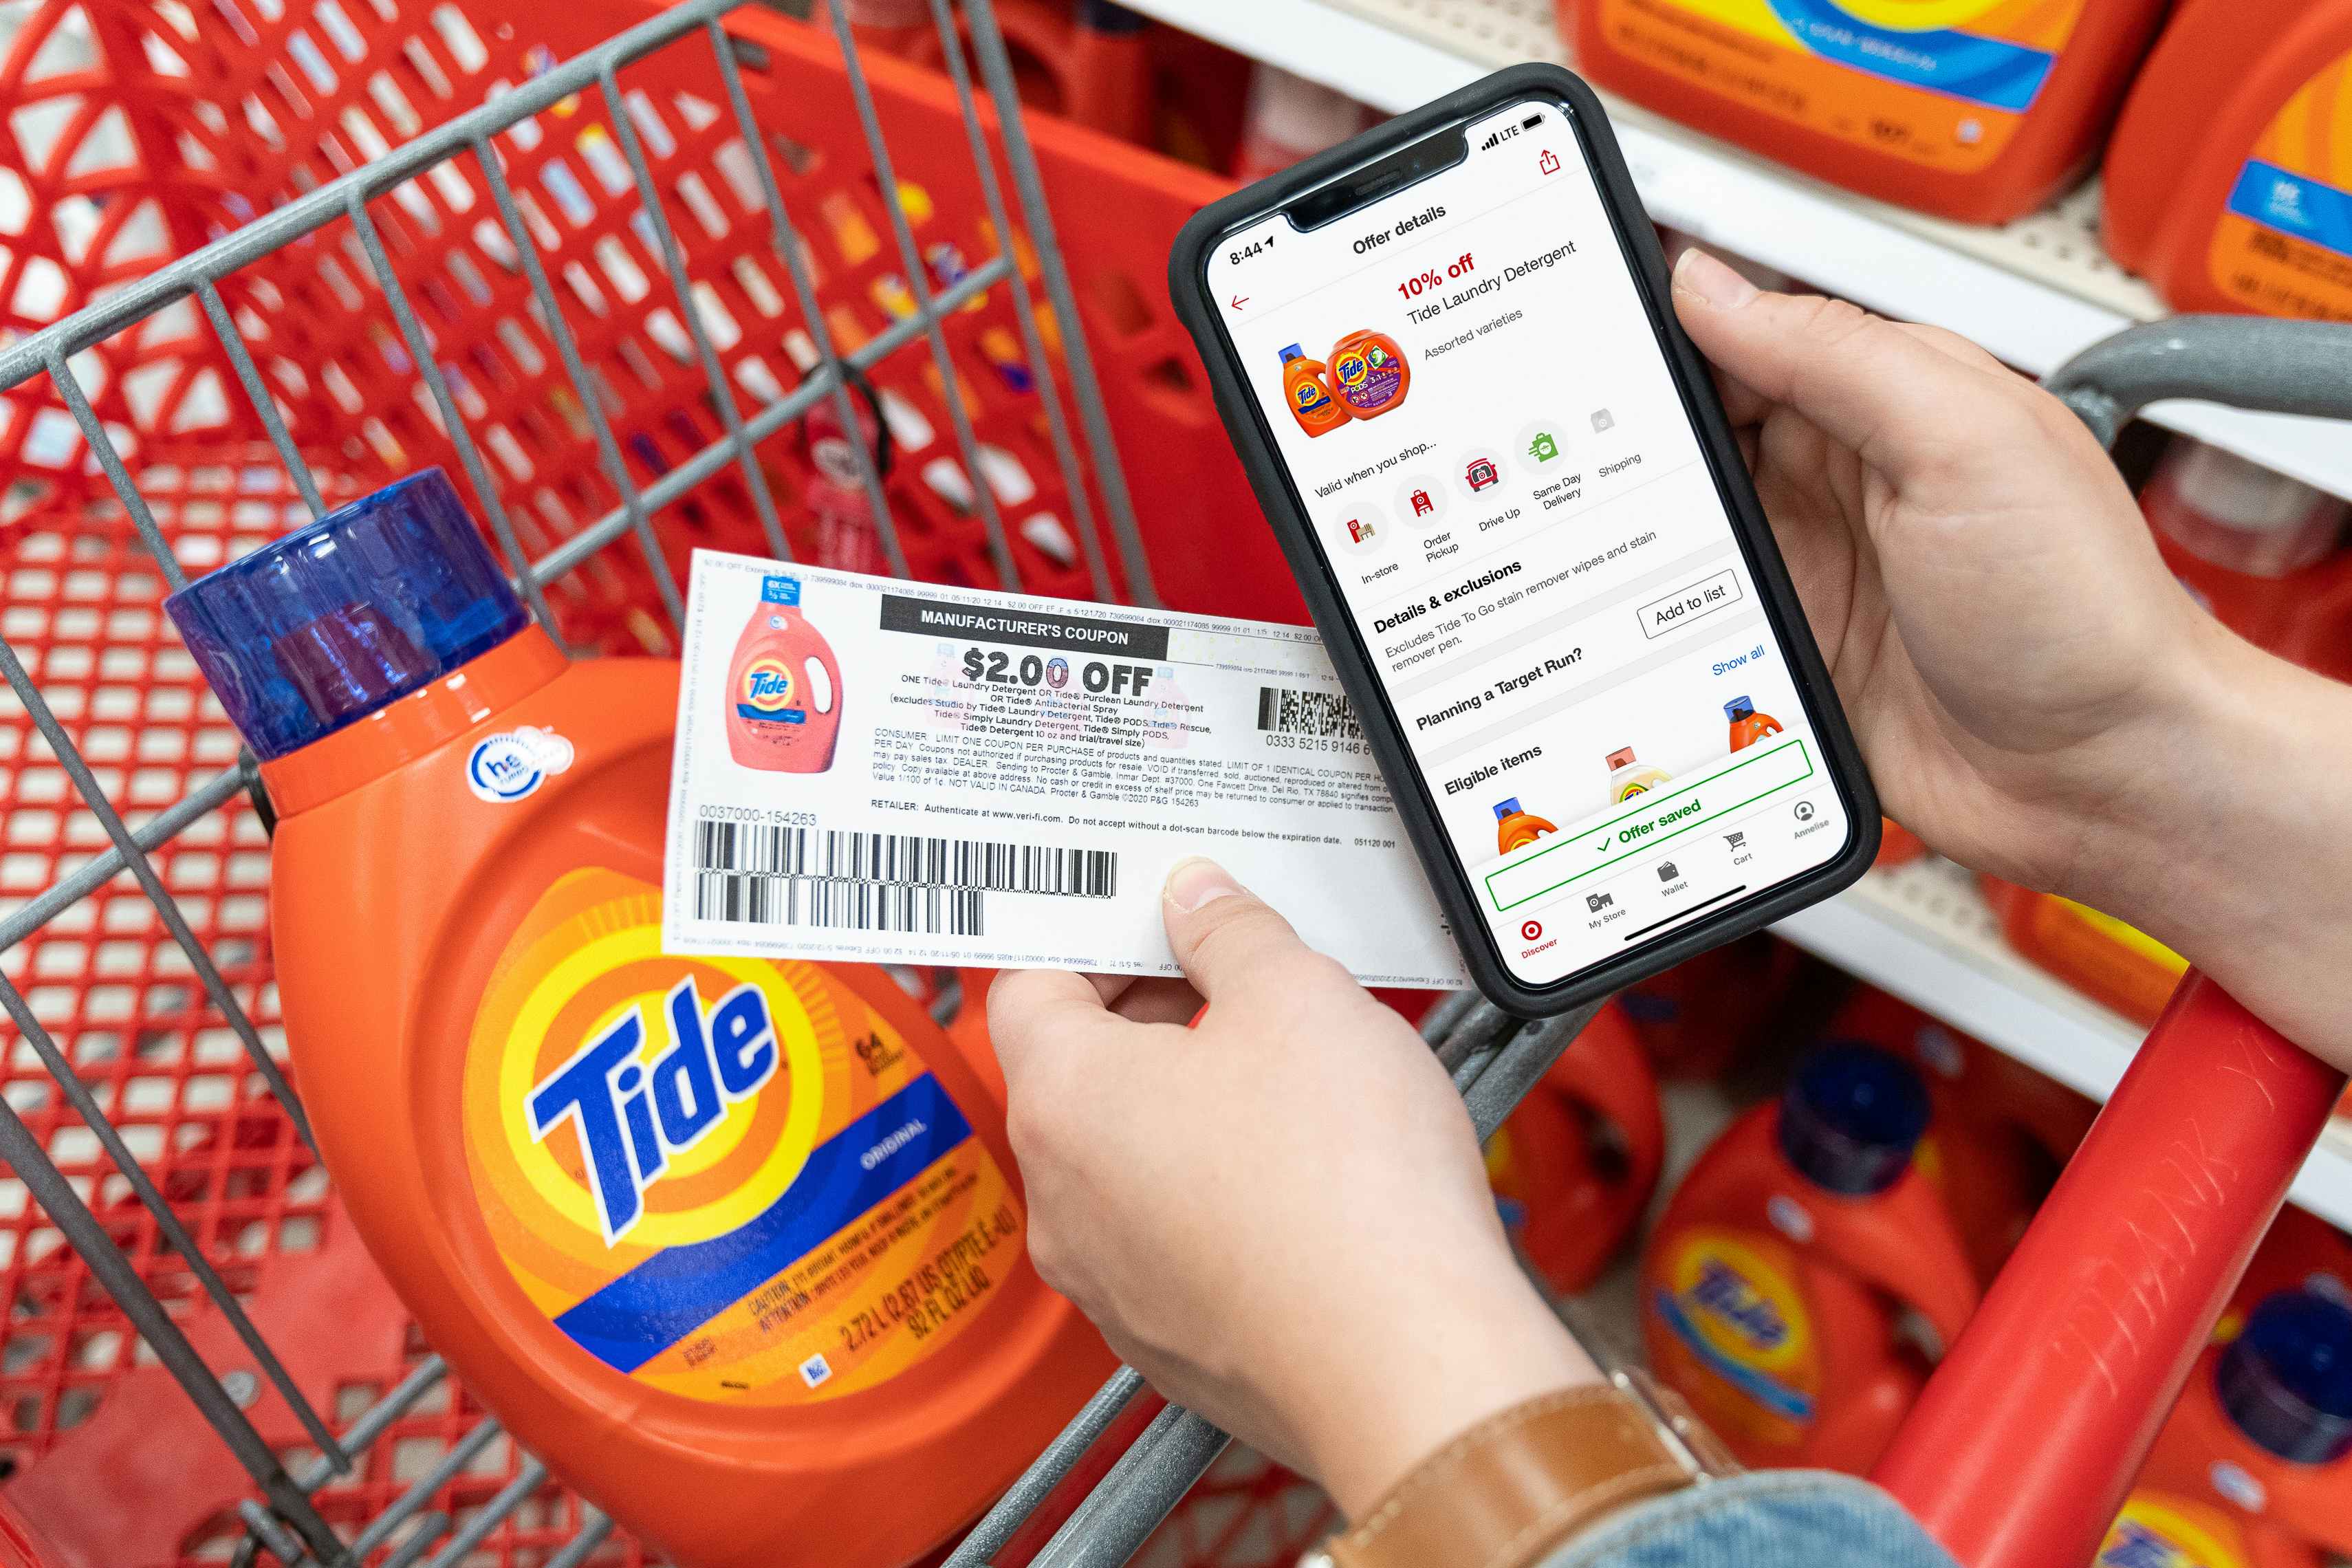 A person's hands holding a cell phone displaying 10% off Tide laundry detergent on the target circle app and a $2 off manufacture coupon, and a bottle of Tide liquid detergent in a Target shopping cart.